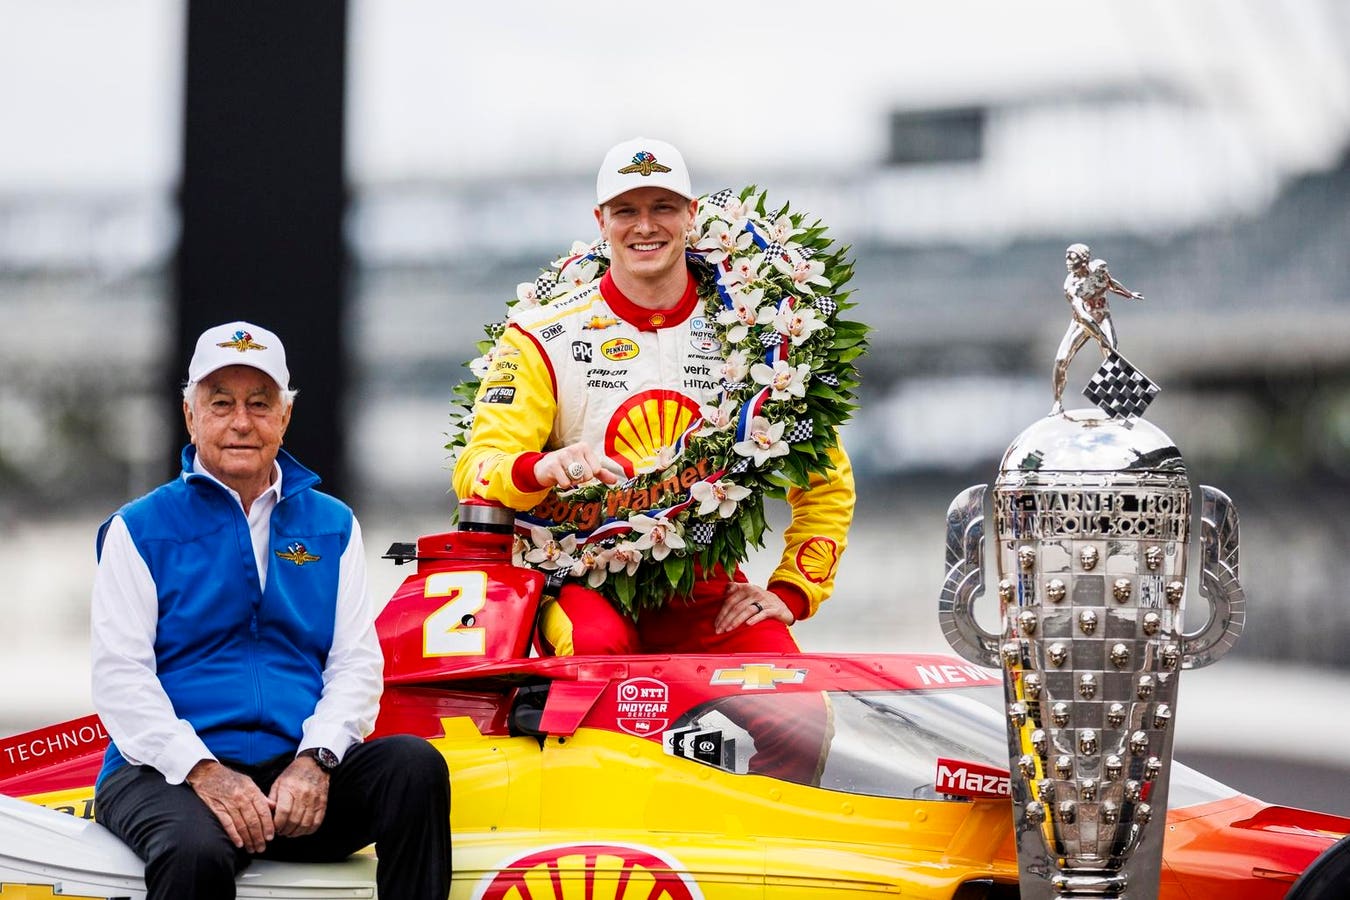 Indy 500 Winner Josef Newgarden Collects $4.24 Million From Largest Purse In Indianapolis 500 History